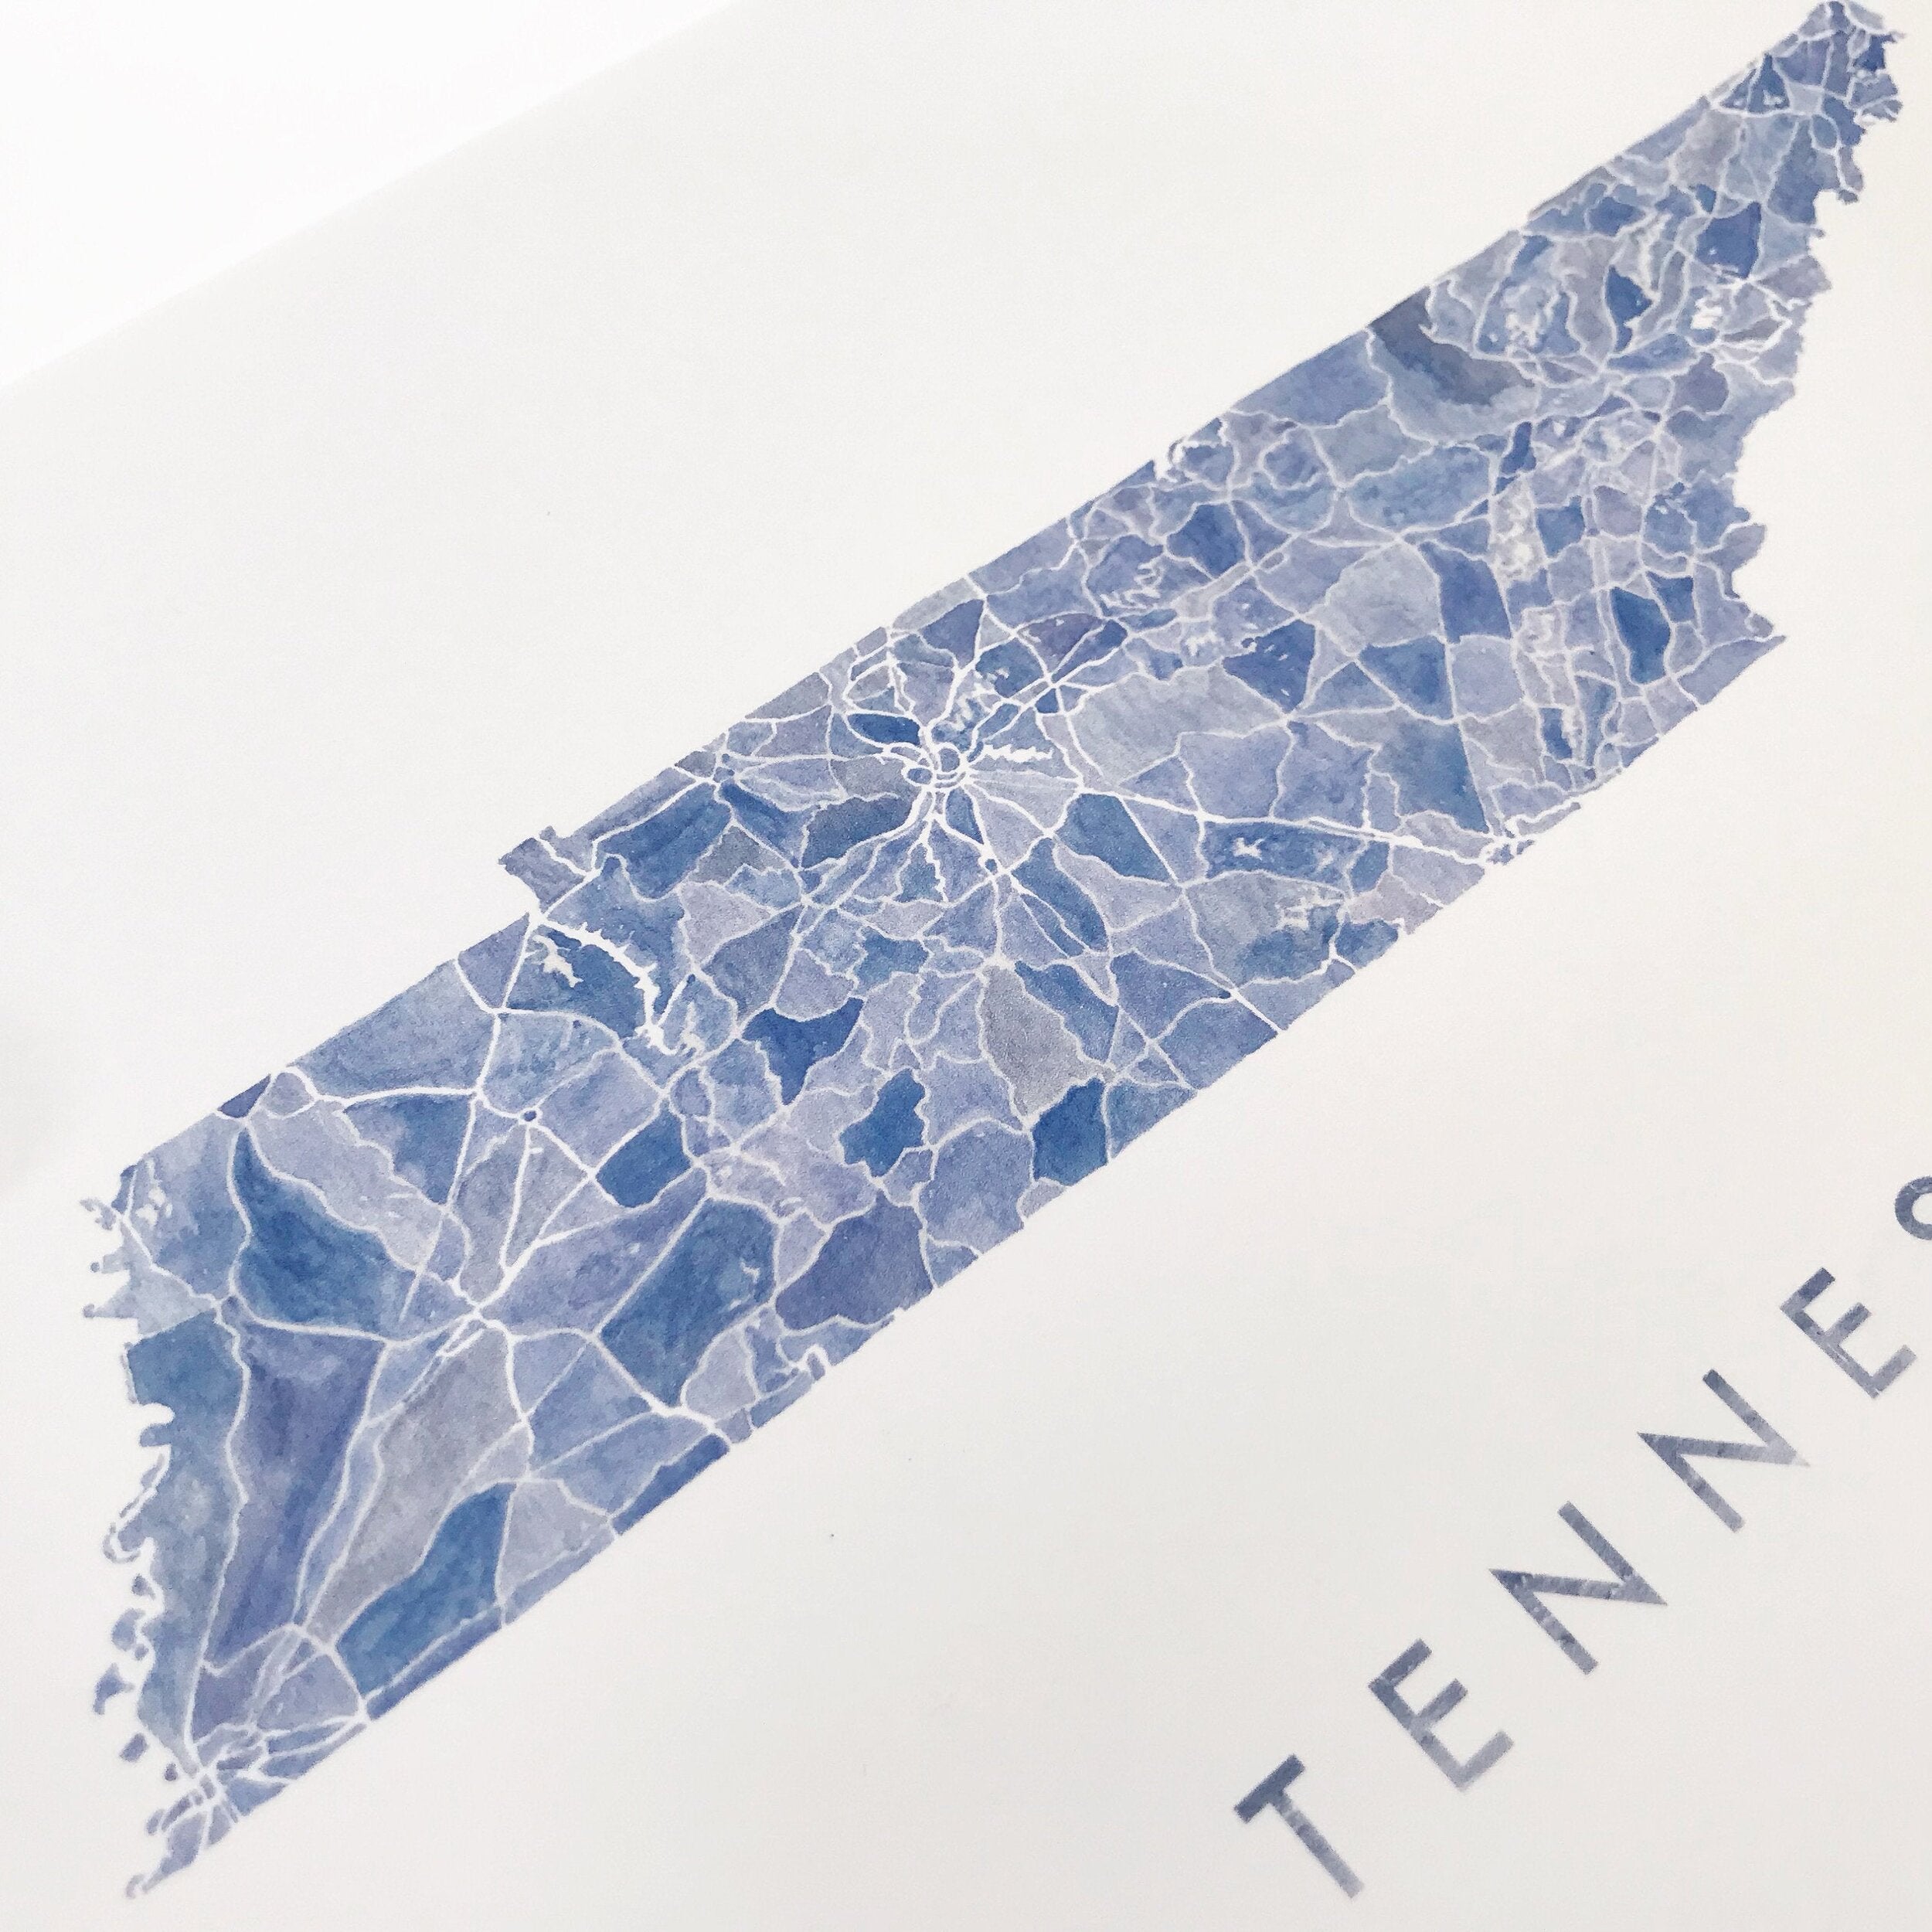 TENNESSEE Watercolor State Map: PRINT